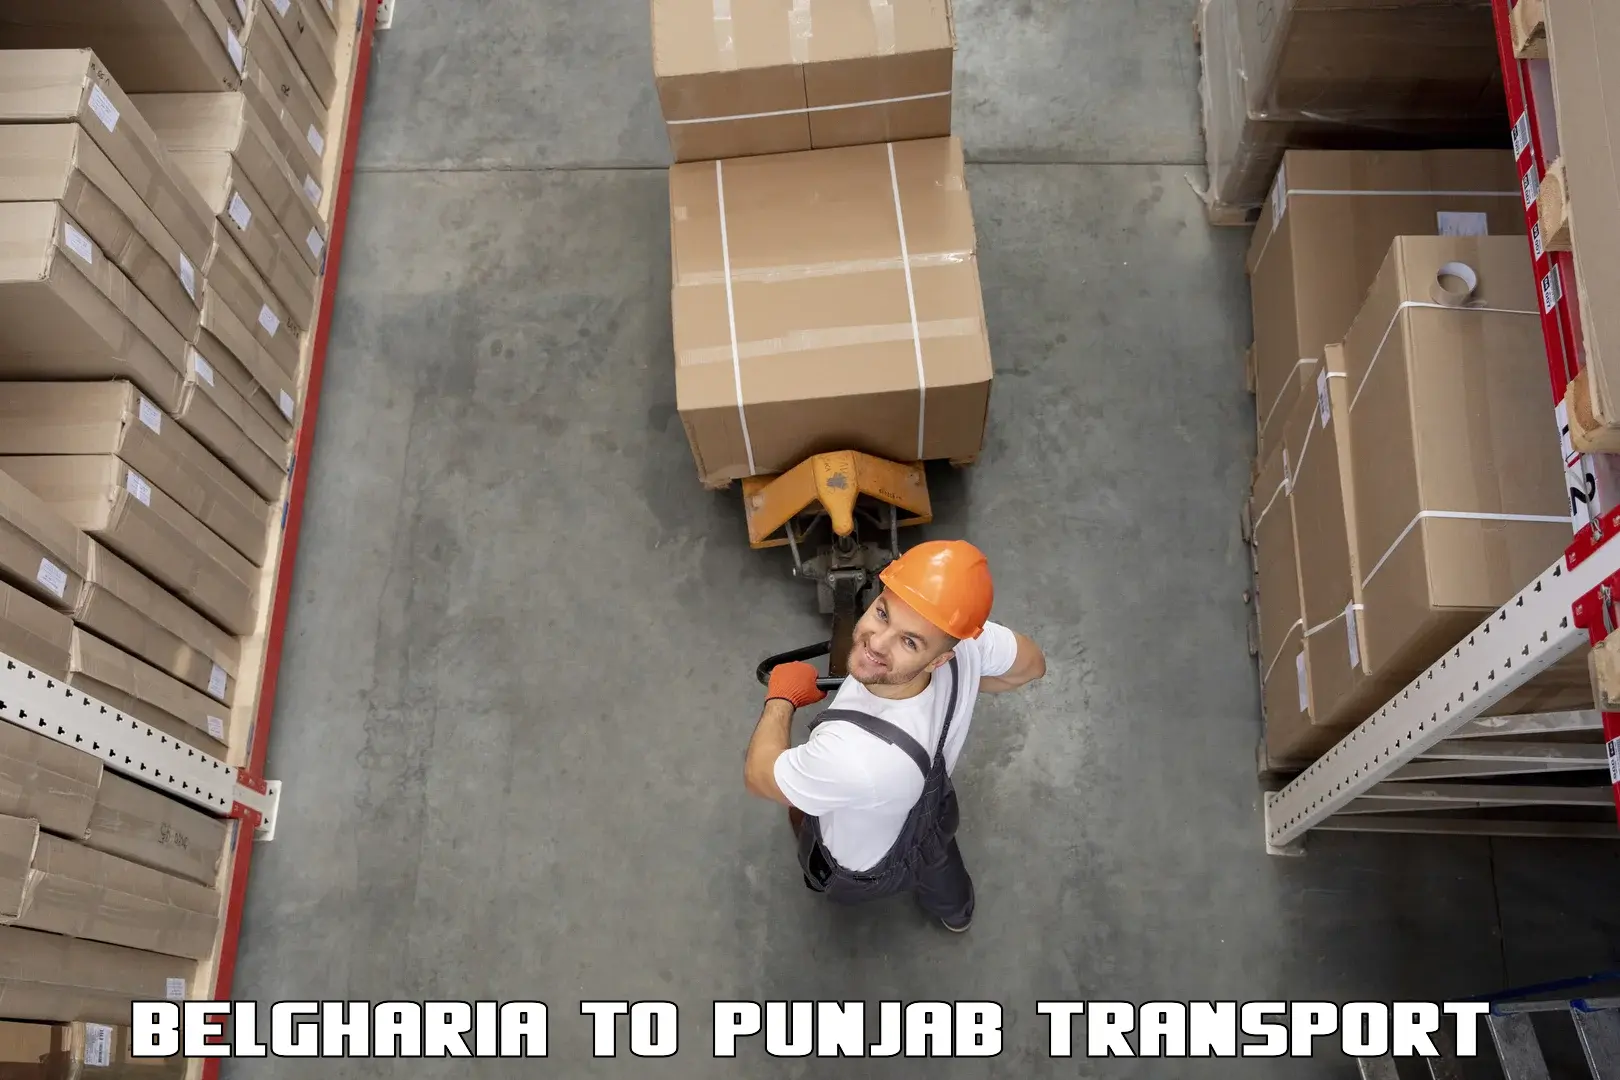 Road transport online services Belgharia to Mohali